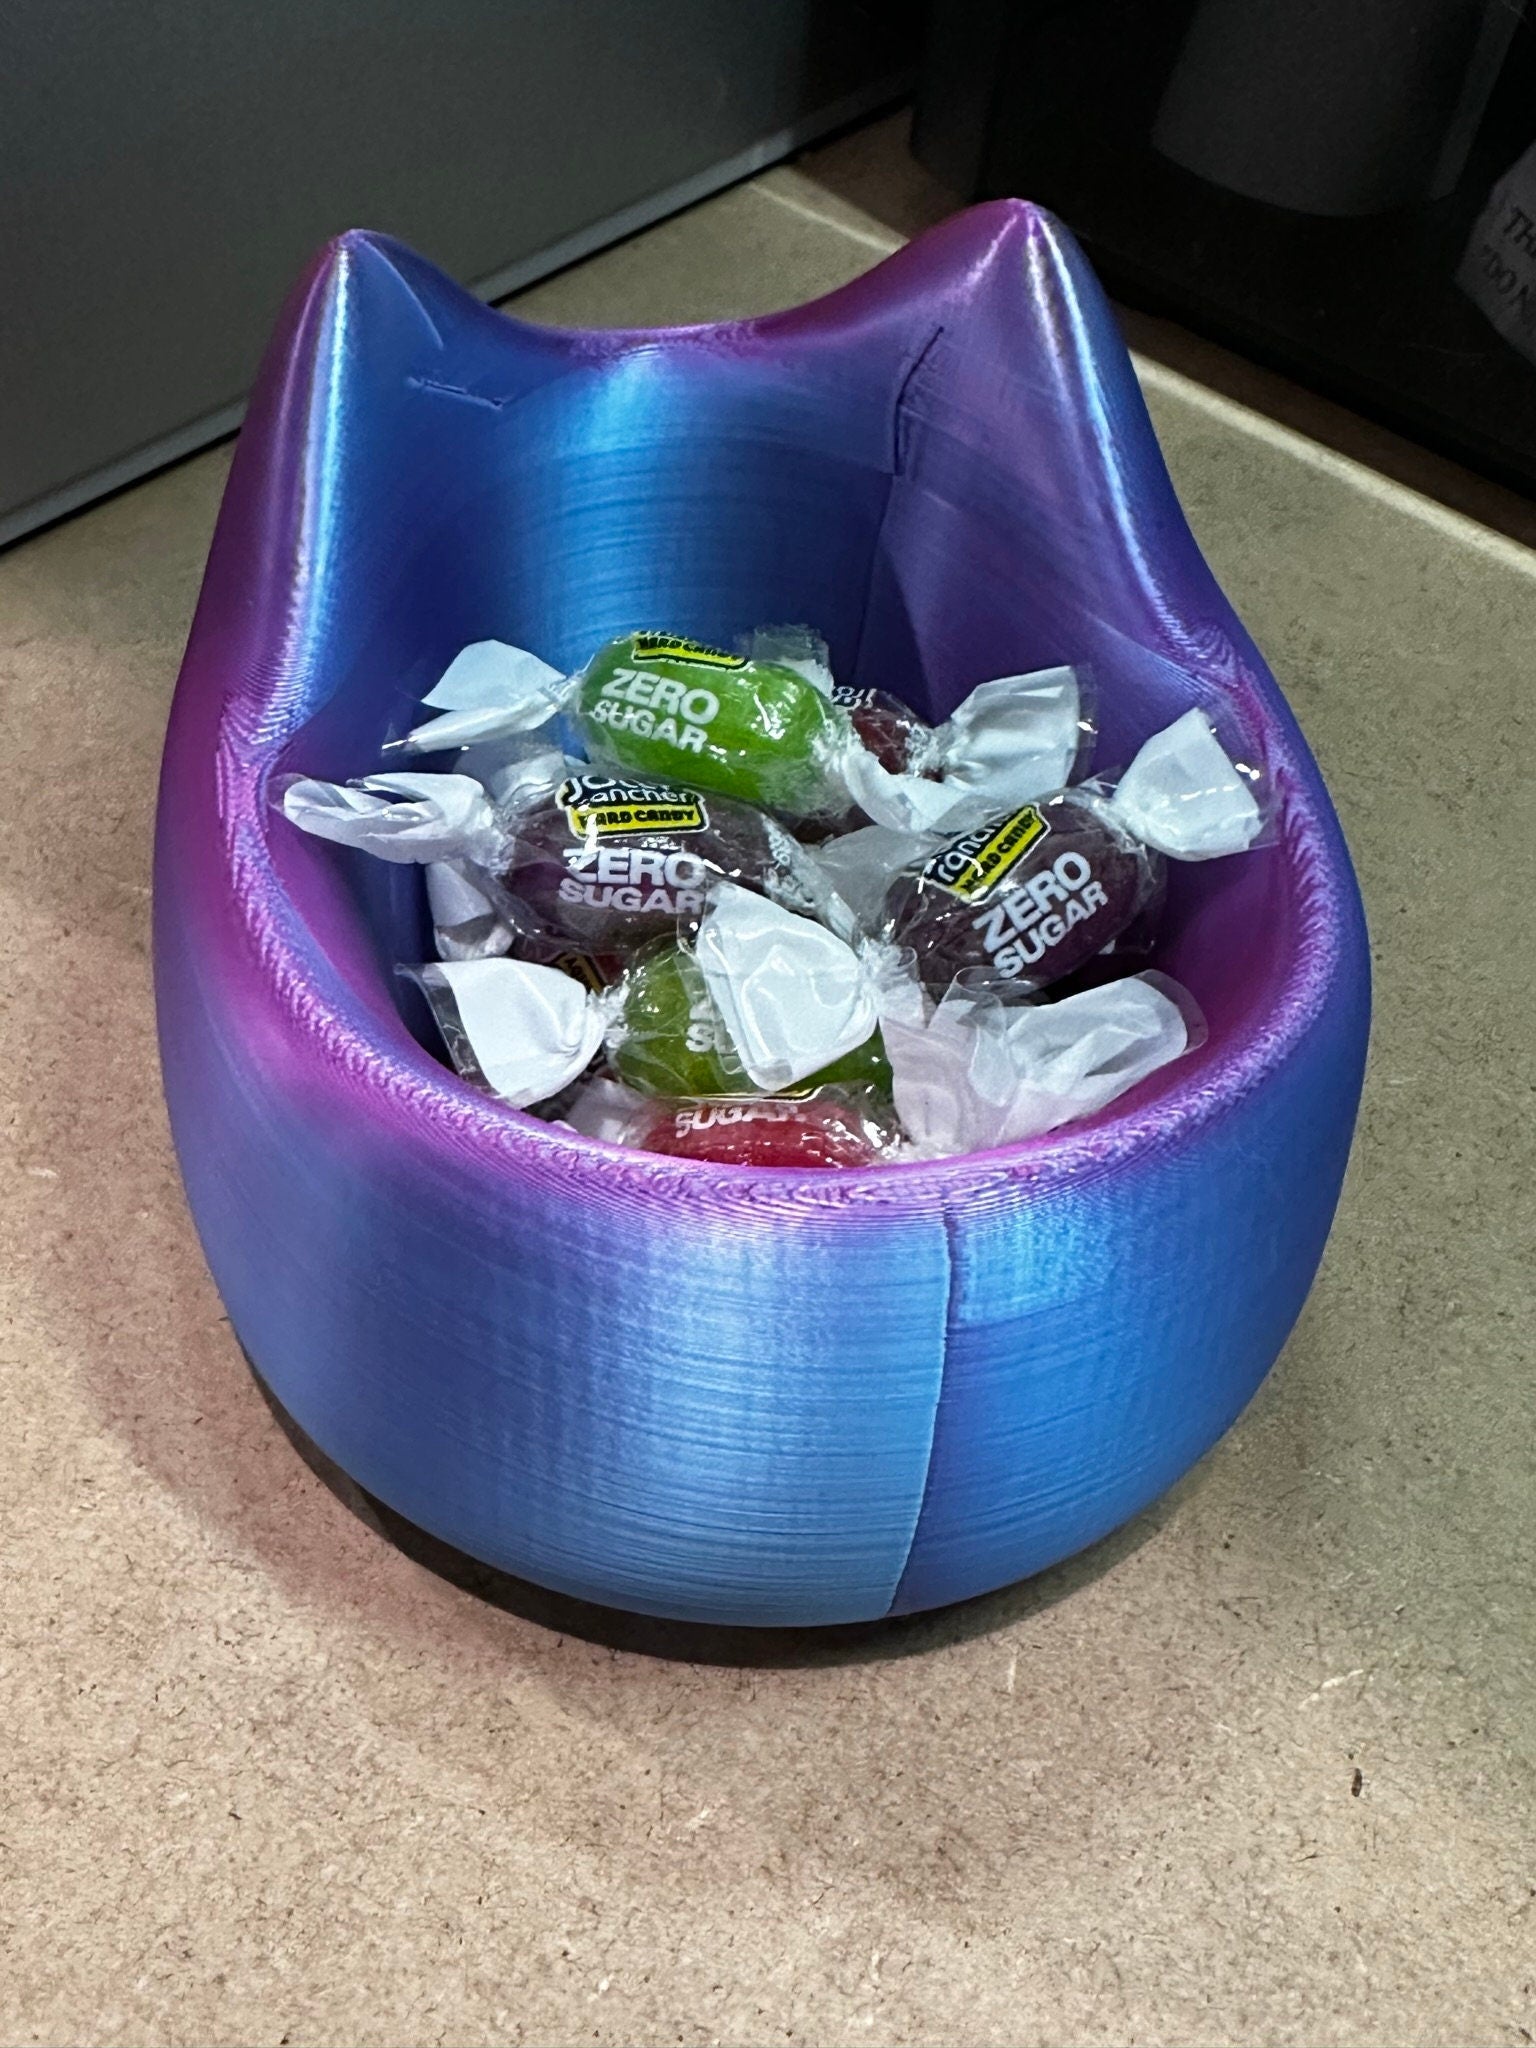 3D Printed Cat Face Bowl Great For Holding Candy or For Holding Household Items